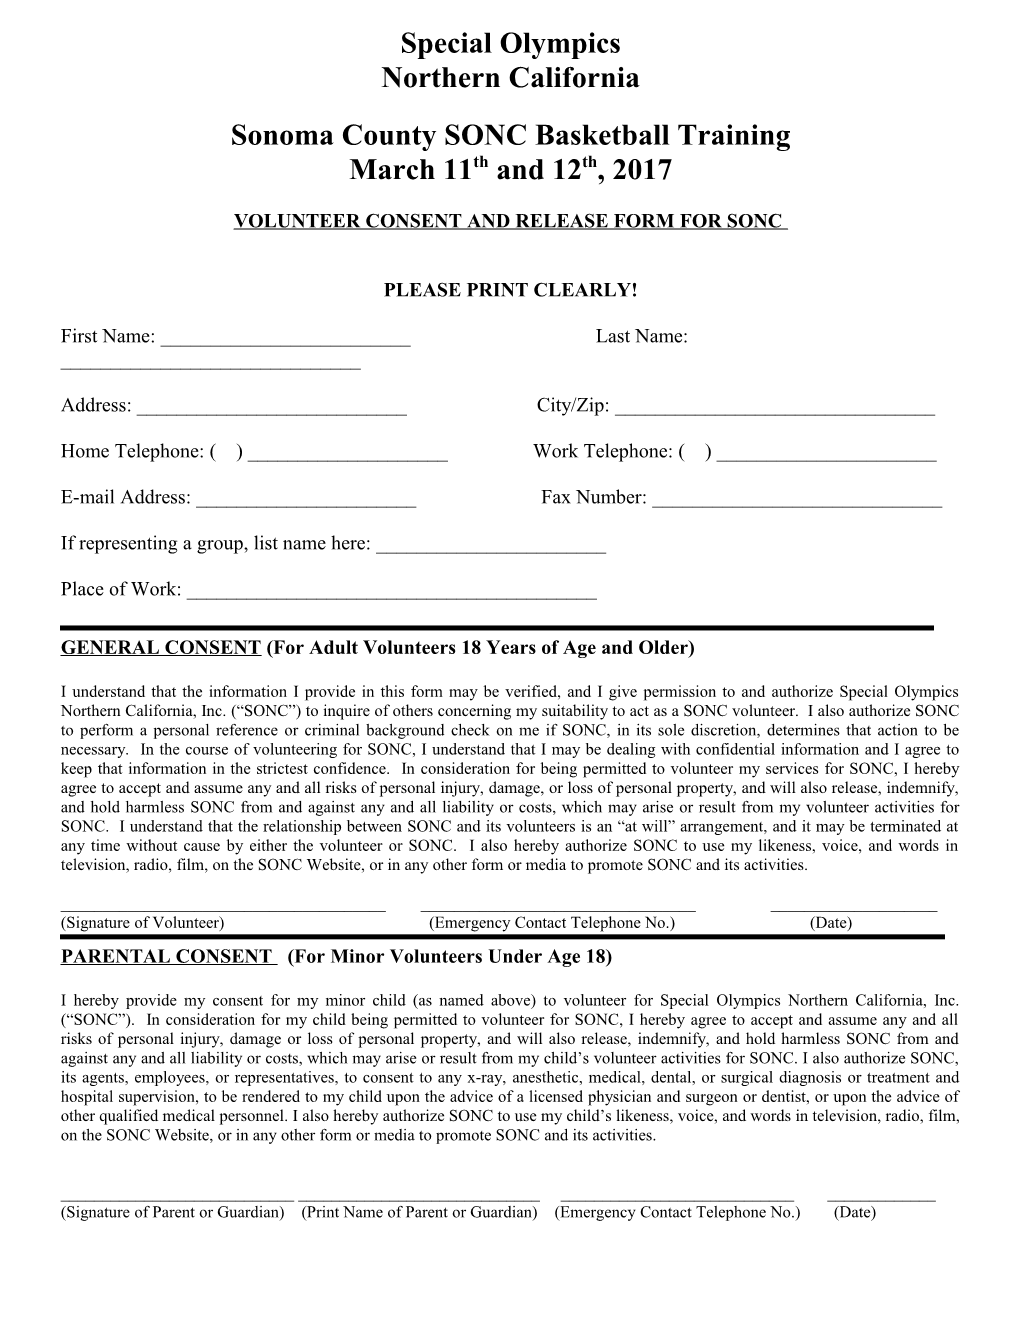 Volunteer Consent and Release Form for Sonc